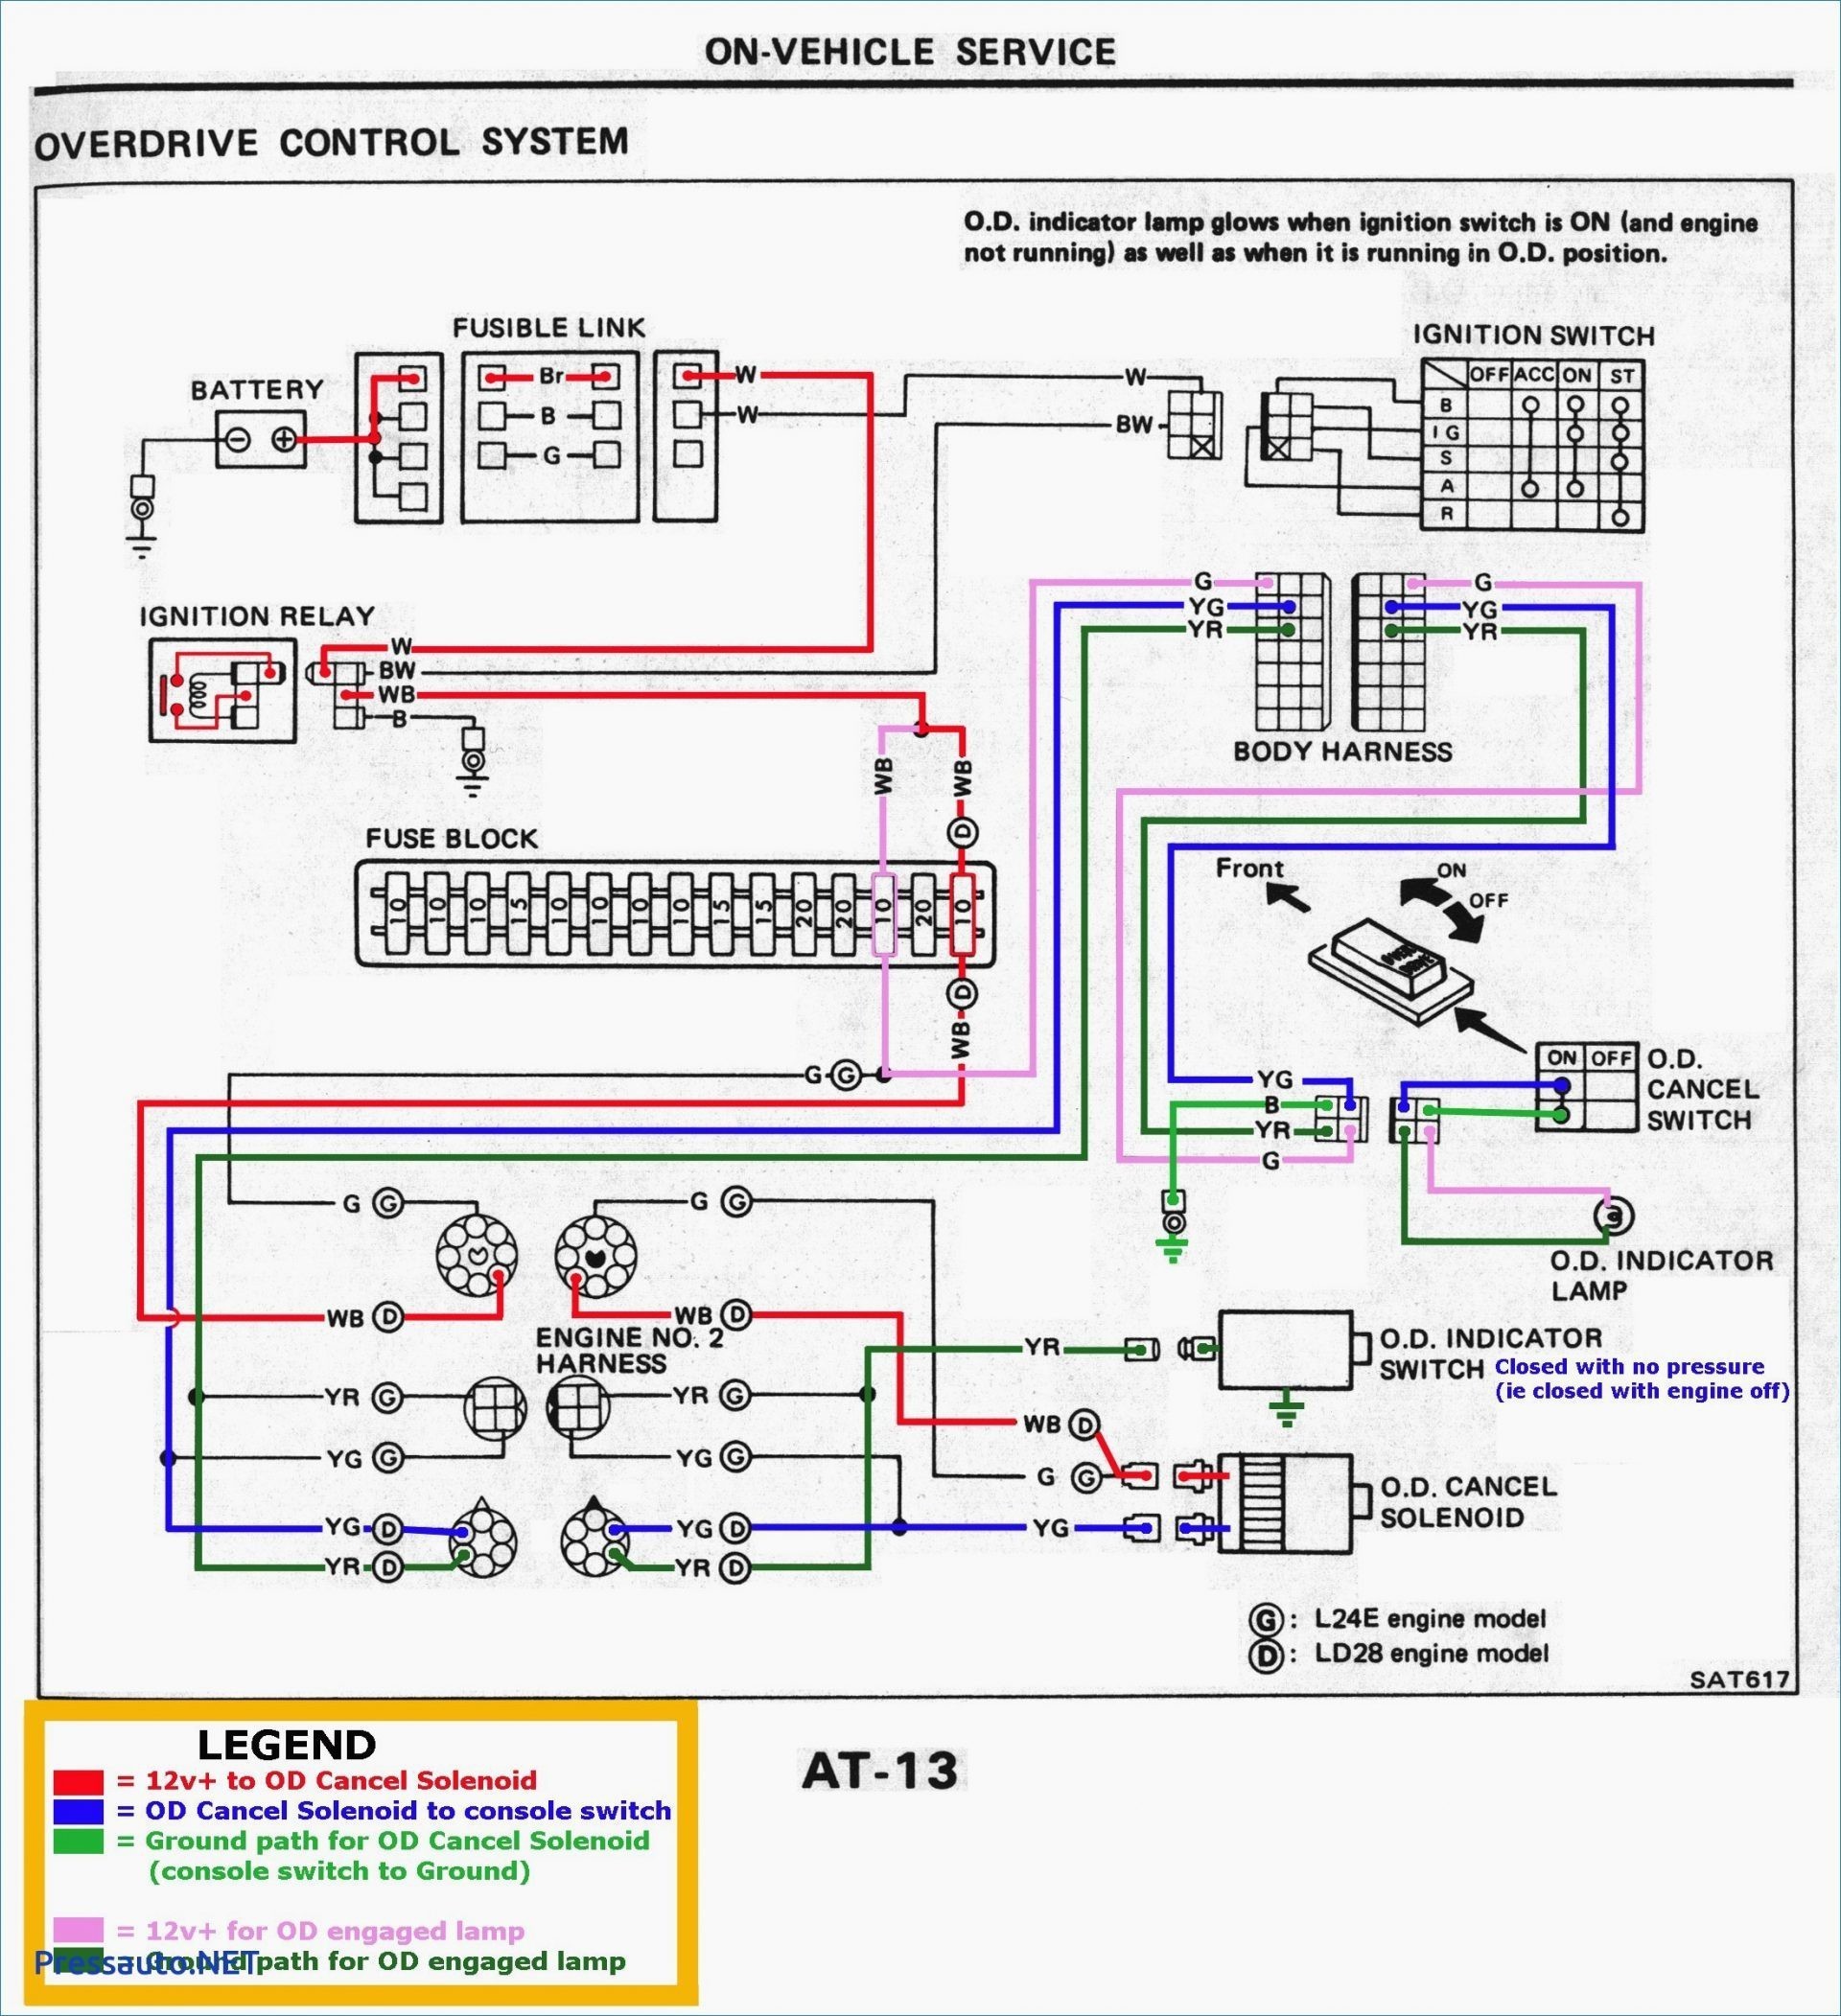 1996 Jeep Grand Cherokee Engine Diagram 97d8464 2000 Buick Regal Ignition Switch Wiring